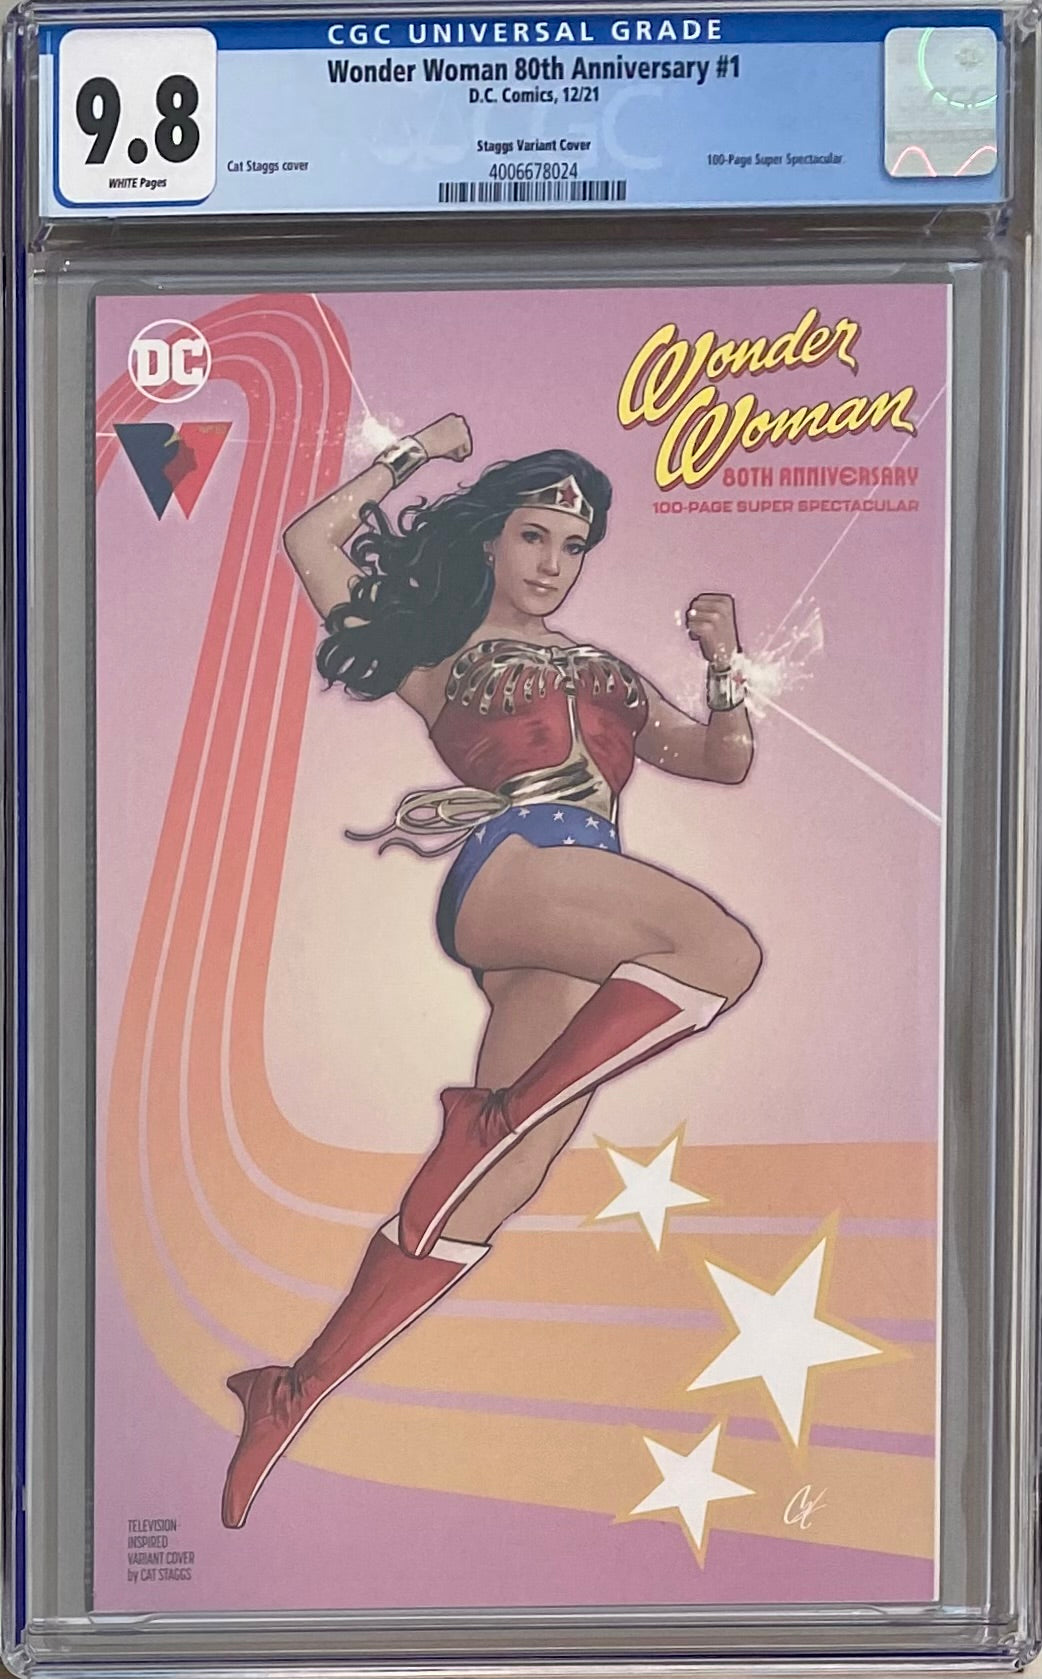 Wonder Woman 80th Anniversary 100 Page Super Spectacular #1 Staggs Variant CGC 9.8